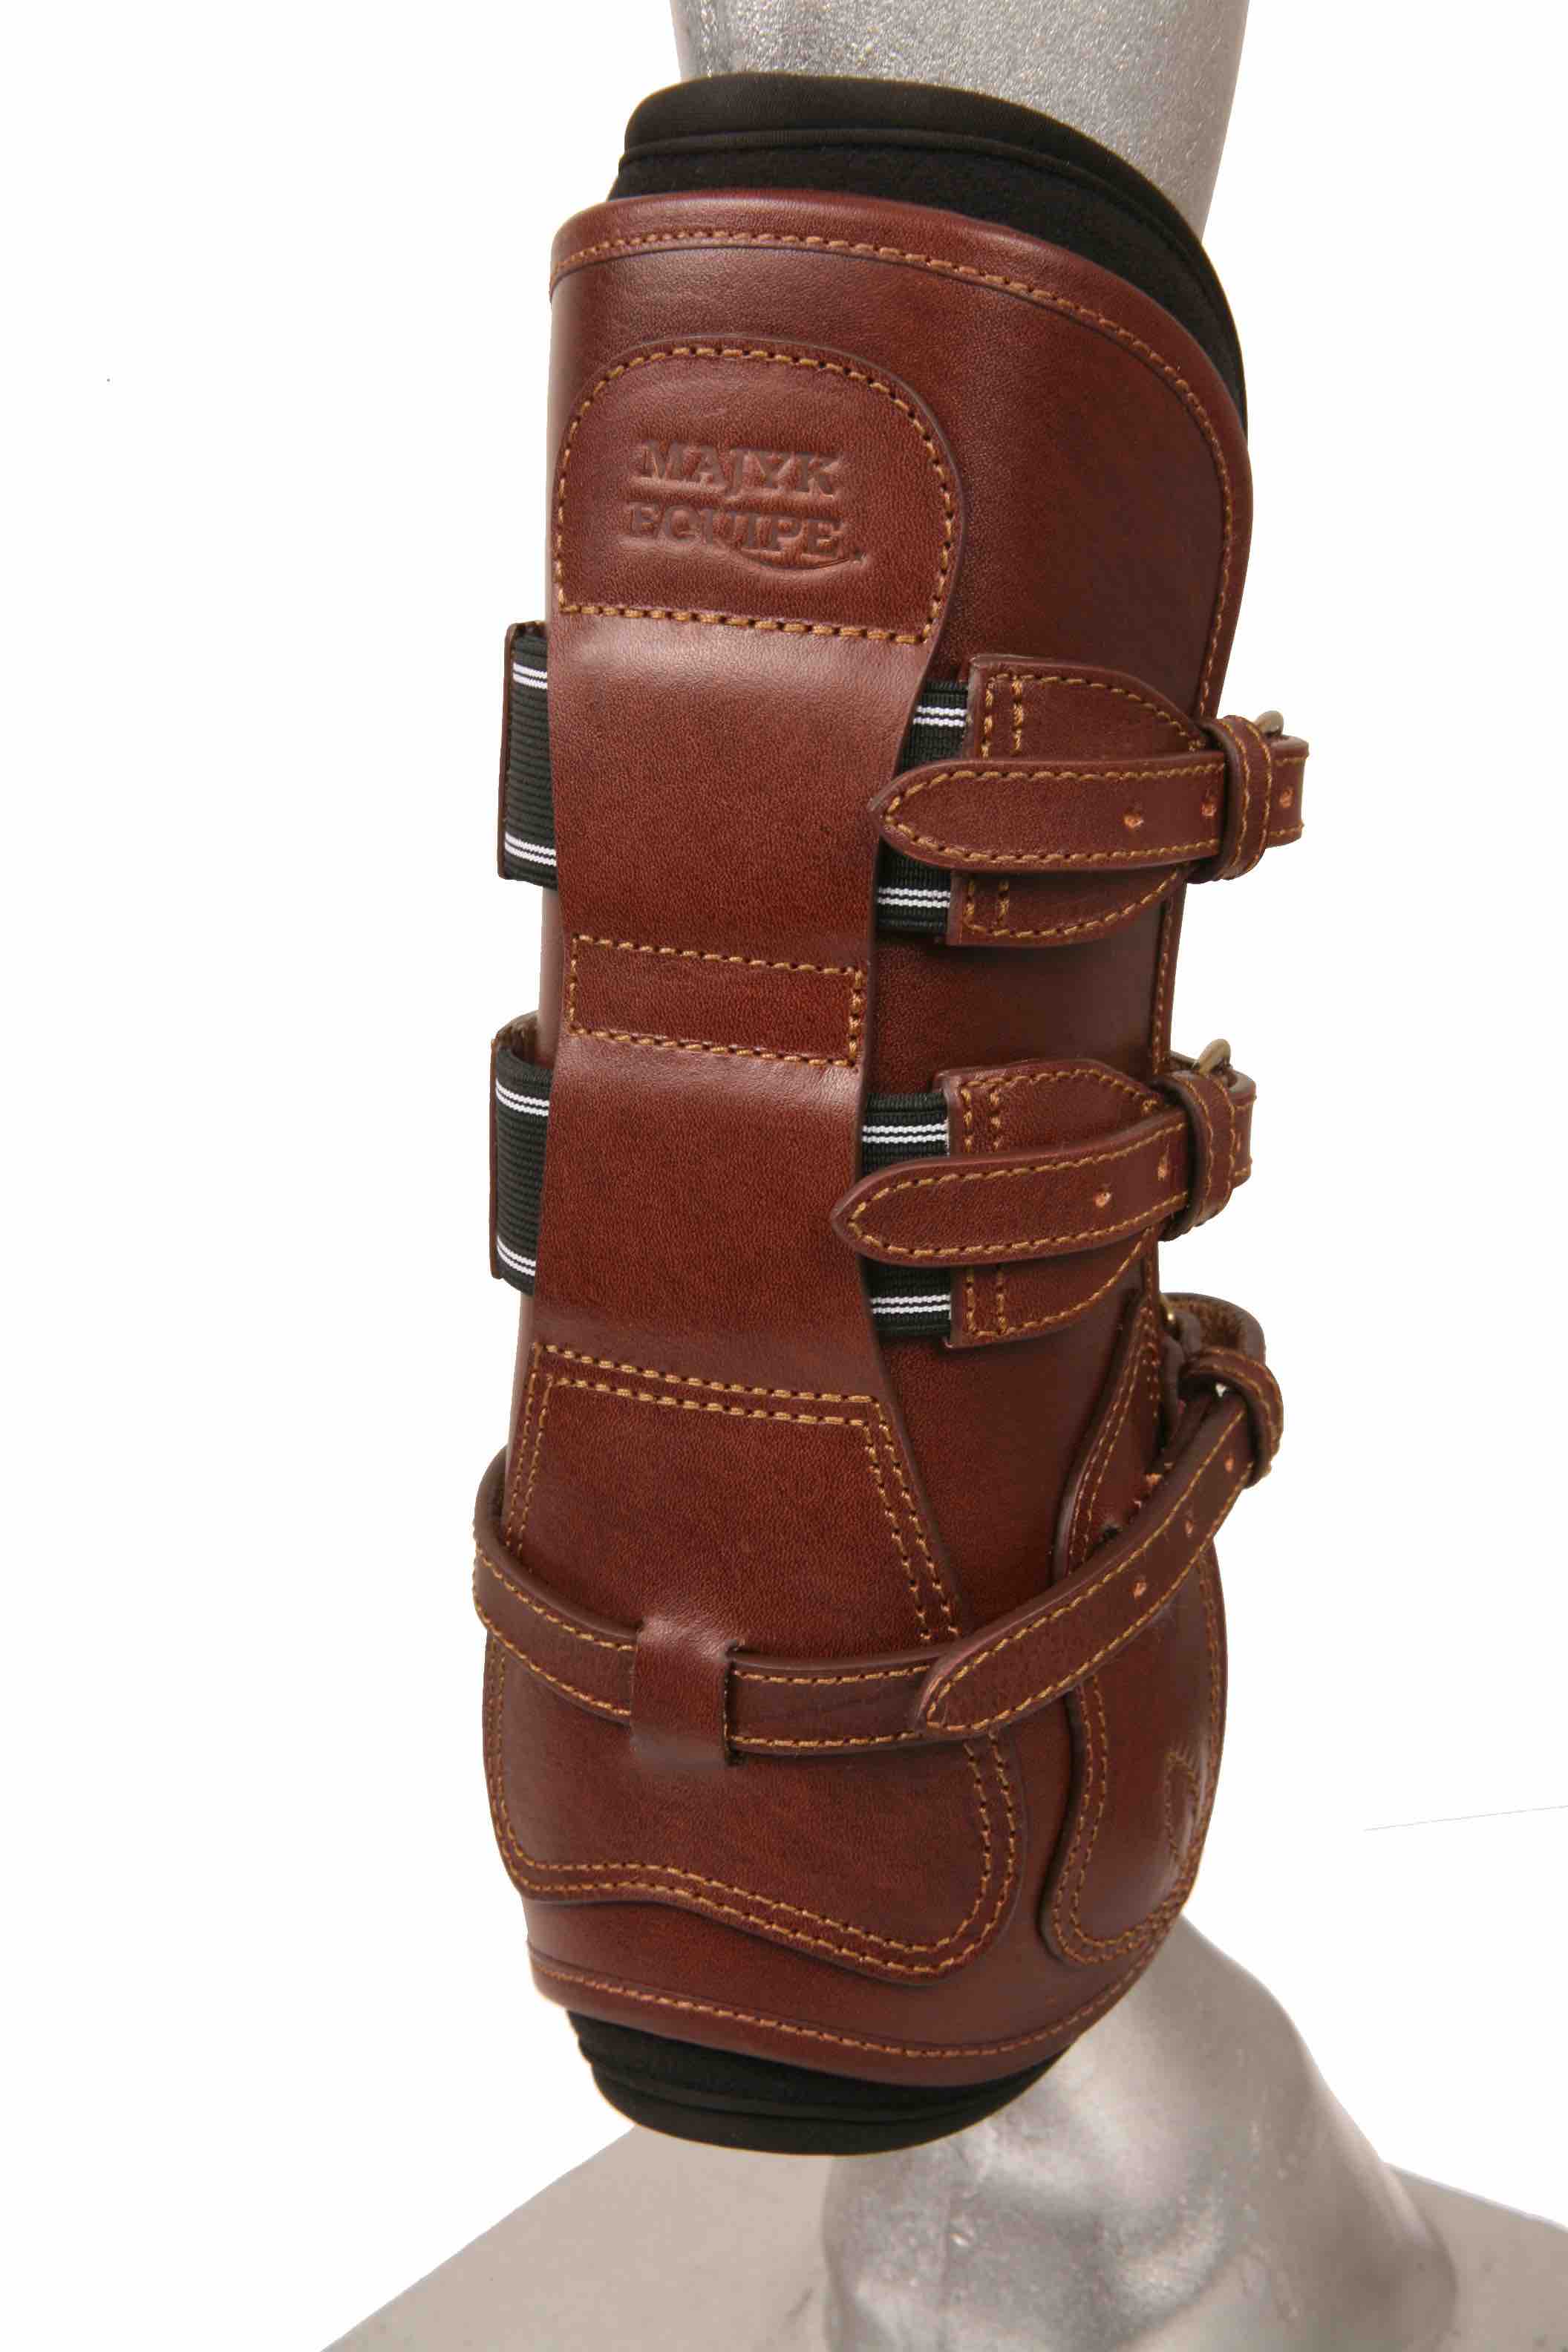 Majyk leather Jump Boots - Four Star Eventing Gear